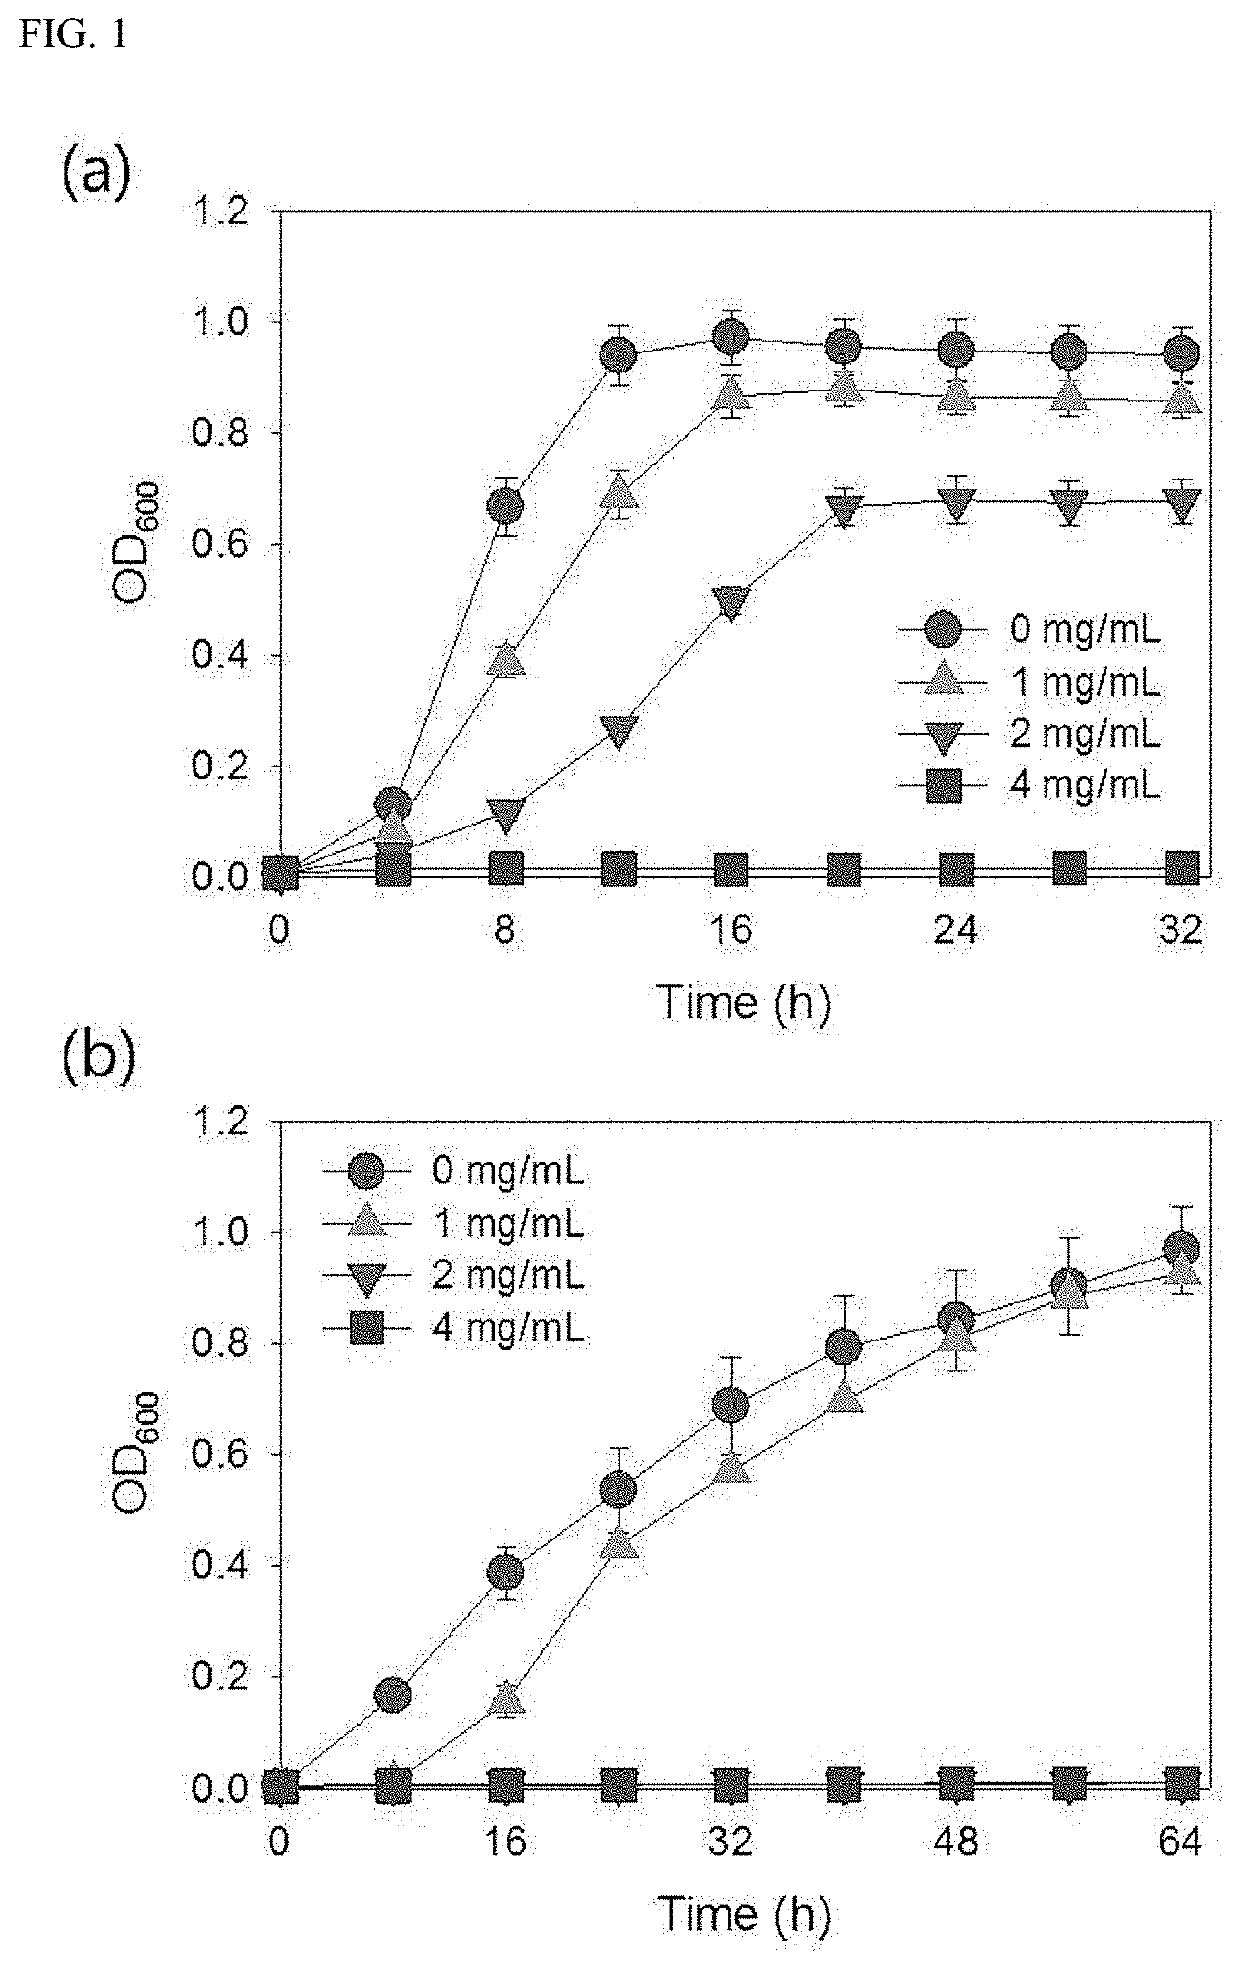 Use of agar-derived oligosaccharides for inhibiting growth of staphylococcus